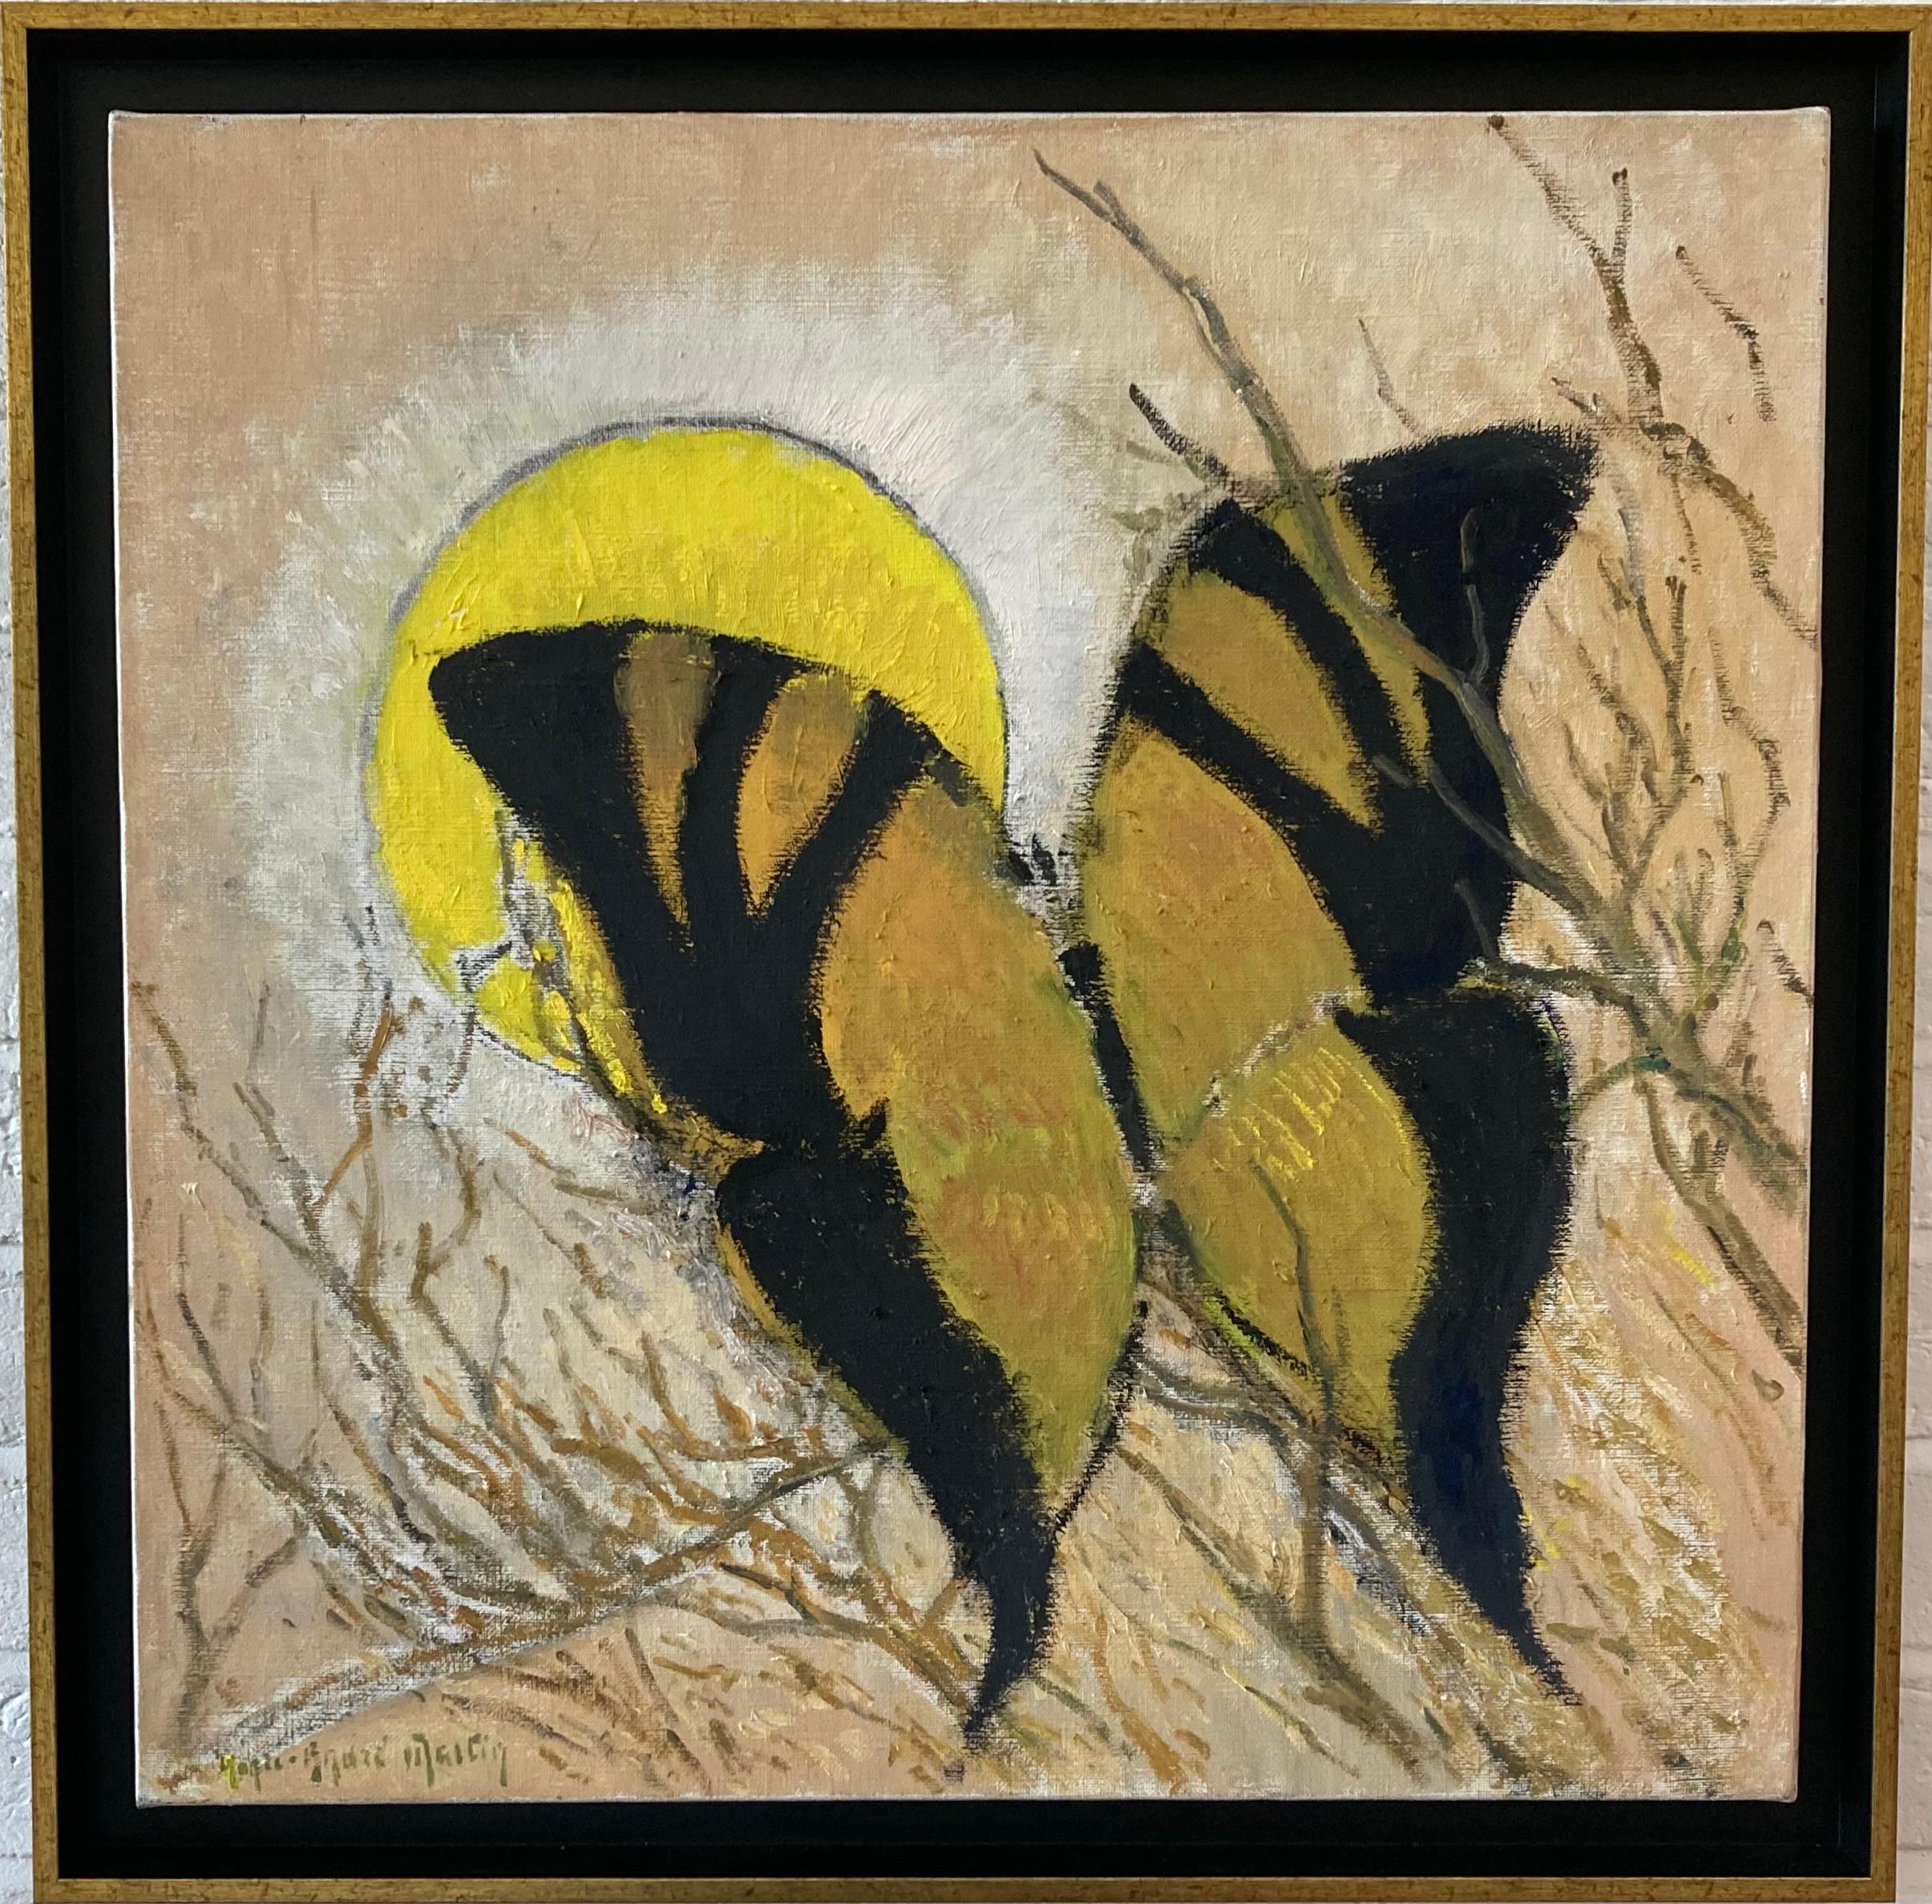 An incredibly striking image of a black and yellow butterfly. Painted with great energy and style. This looks stunning against a white wall.

Henri-André Martin (1918-2004)
A Swallowtail butterfly
Signed 
Oil on canvas
23½ x 23½ inches excluding